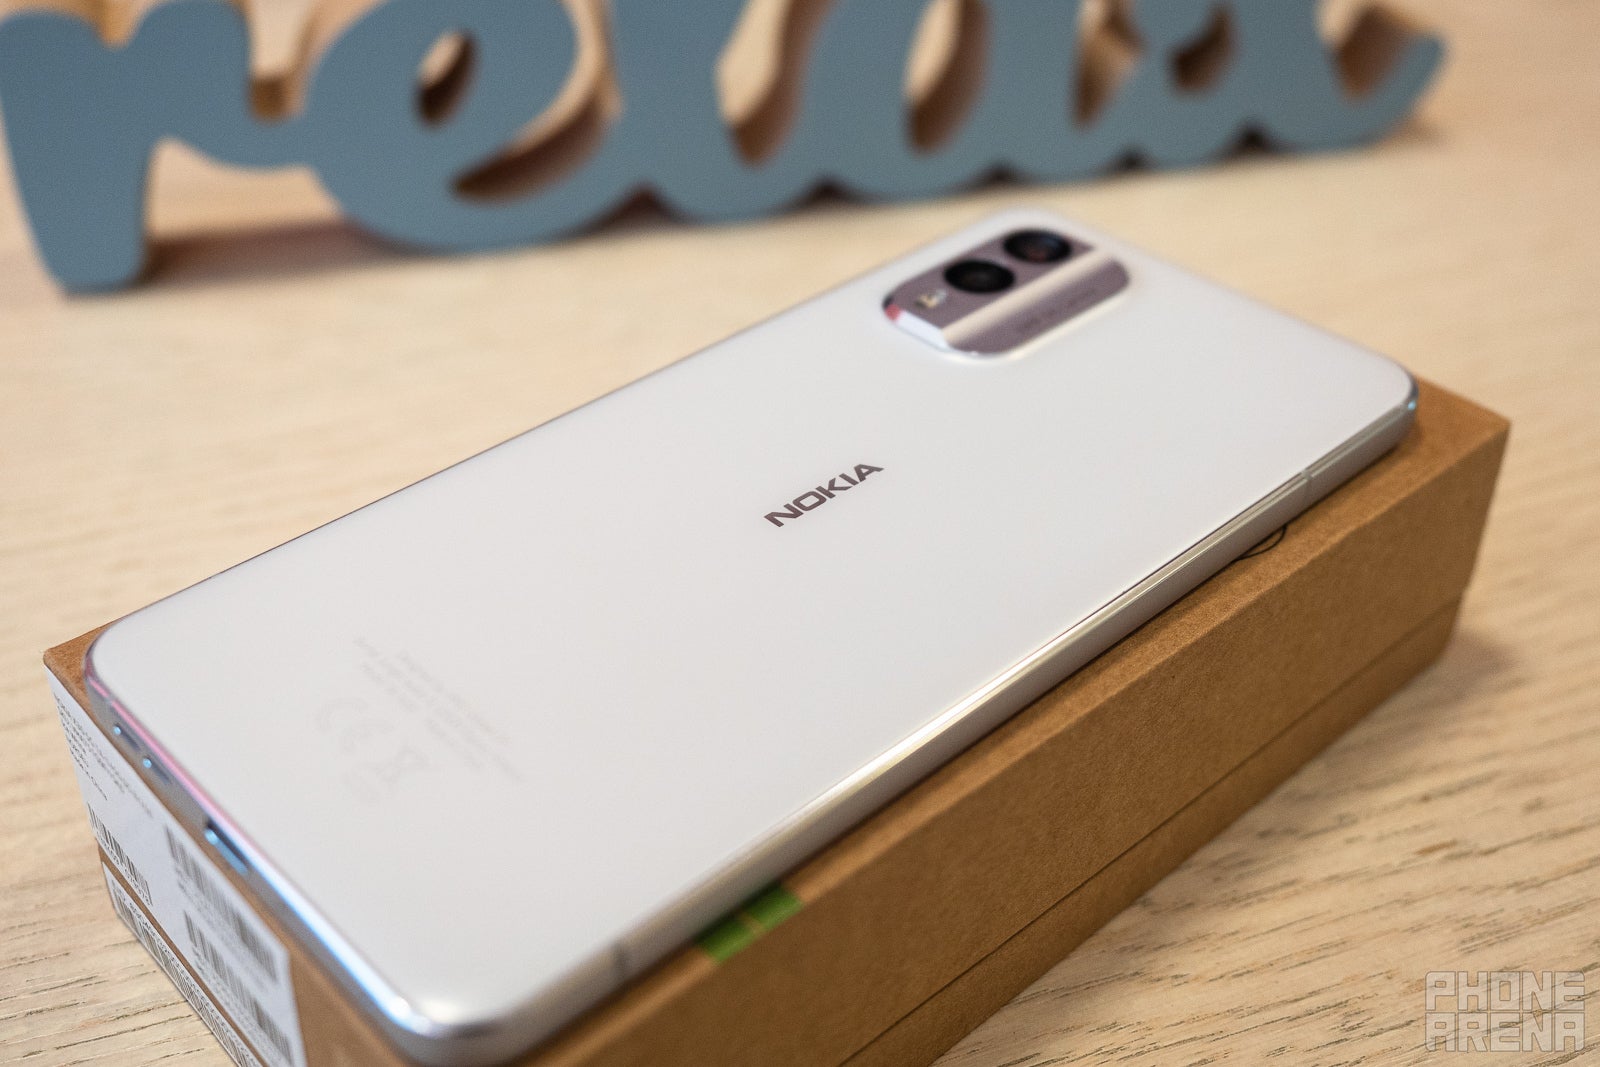 The phone looks good, even though the back is made of plastic (Image credit PhoneArena) - Nokia X30 5G review: A bit of a stretch